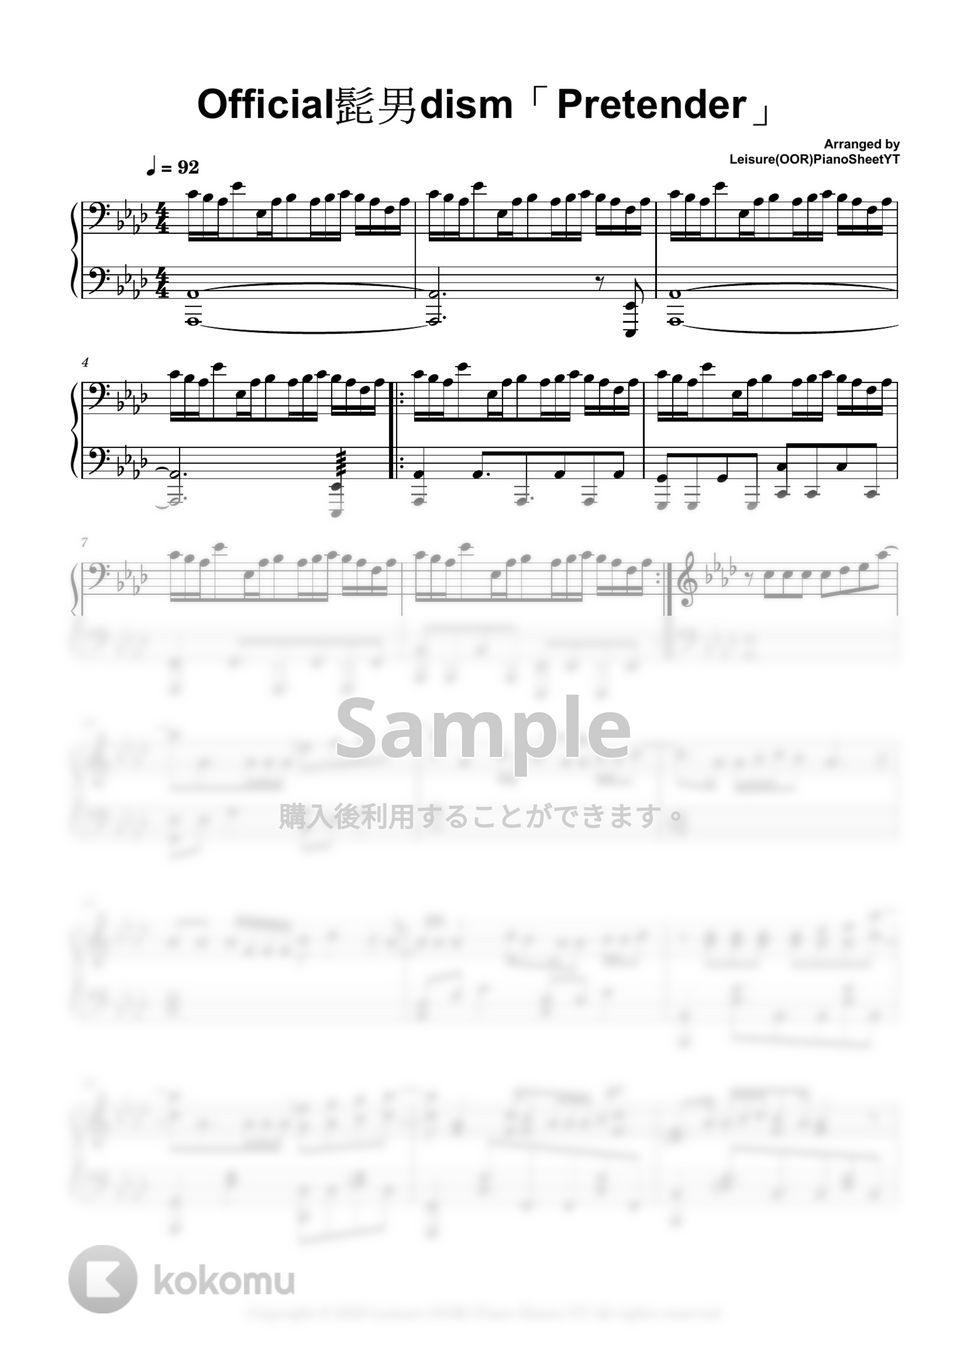 Official髭男dism - Pretender by Leisure (OOR) Piano Sheets YT